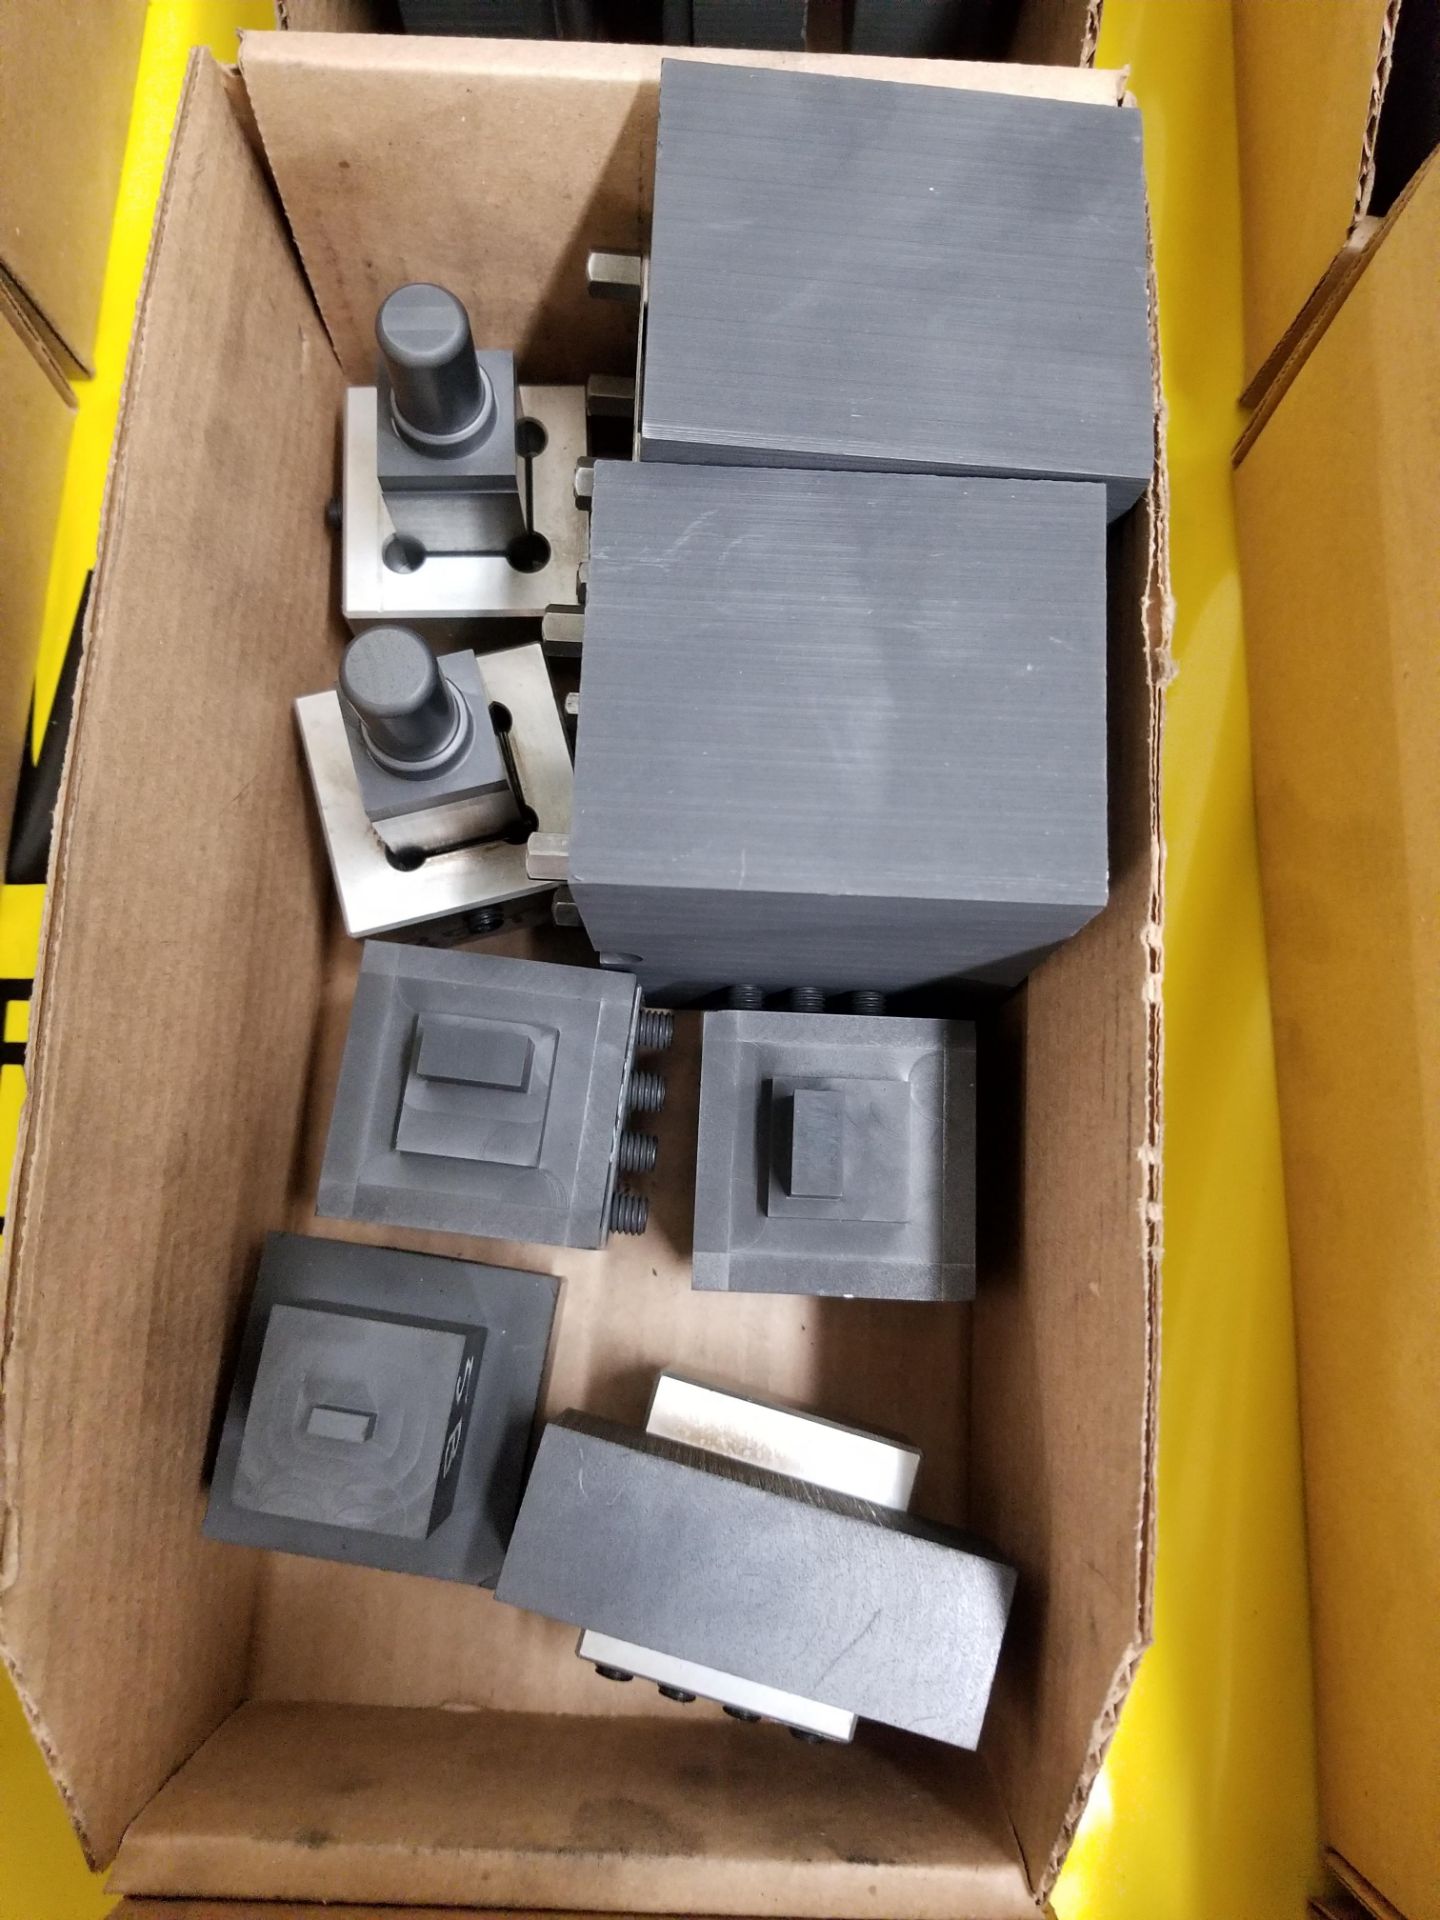 (20) ASSORTED CARBON ELECTRODES WITH D&L QUICK CHANGE RECEIVERS (IN 3 BOXES) - Image 2 of 3